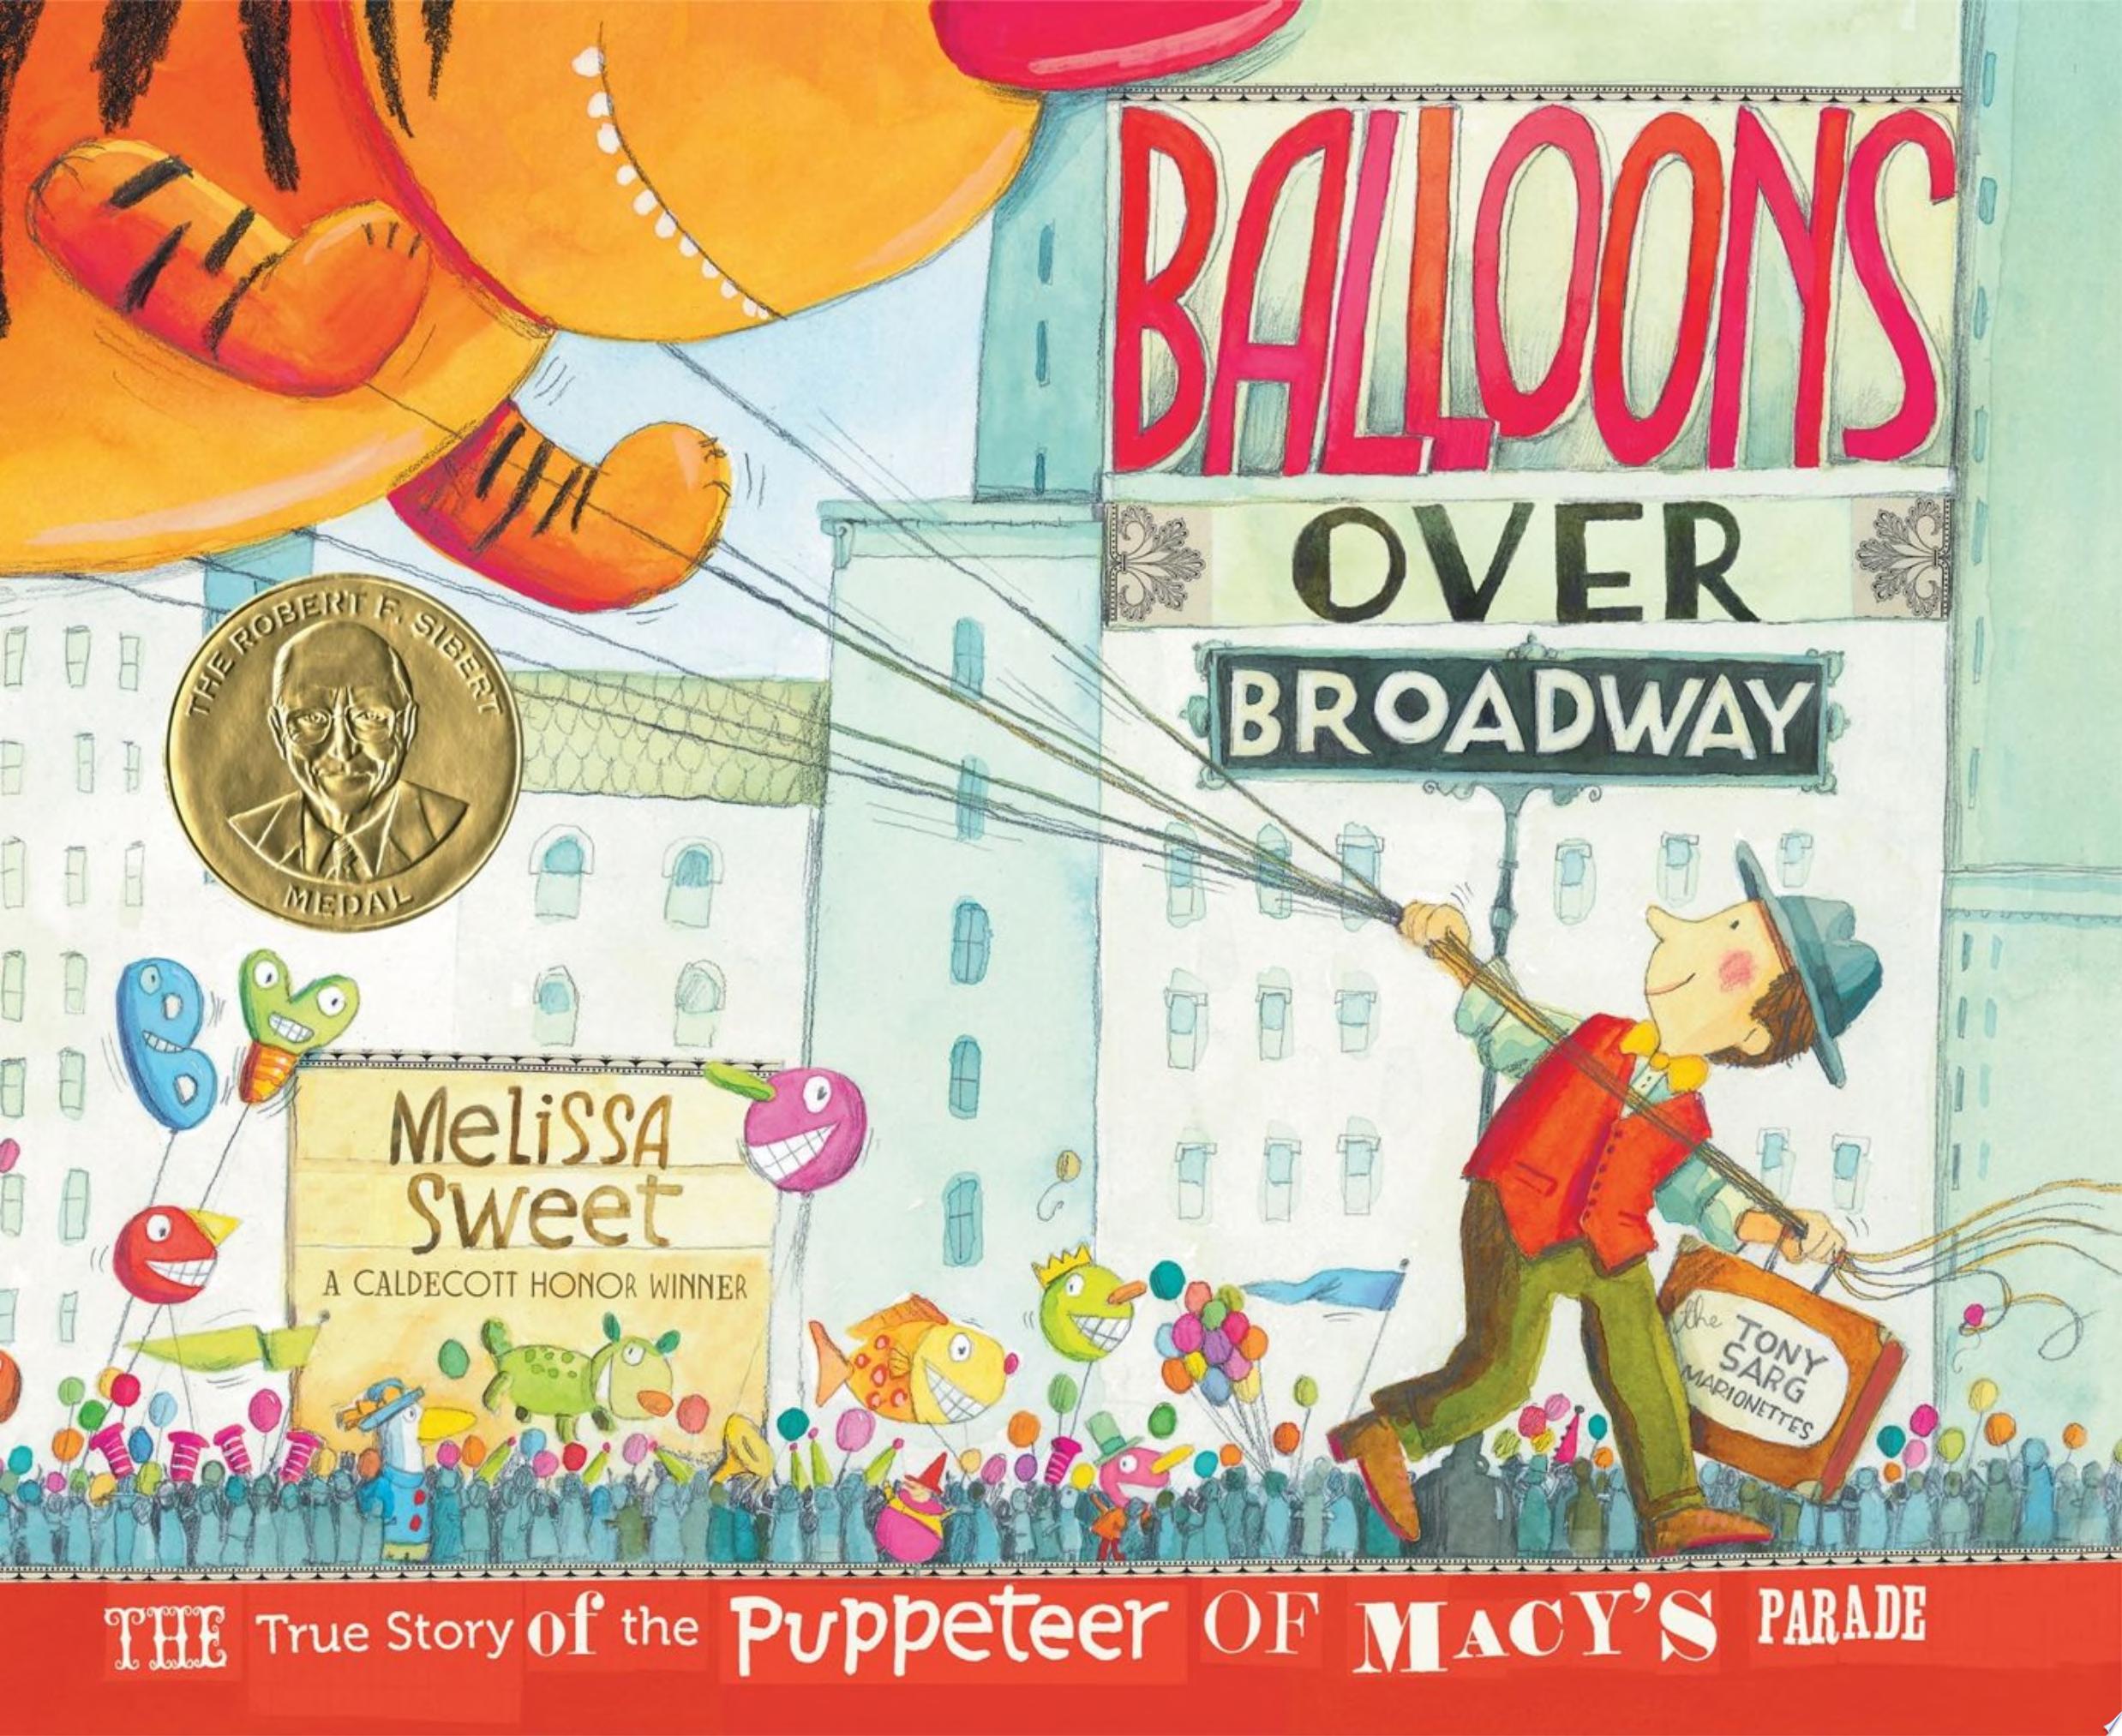 Image for "Balloons over Broadway"